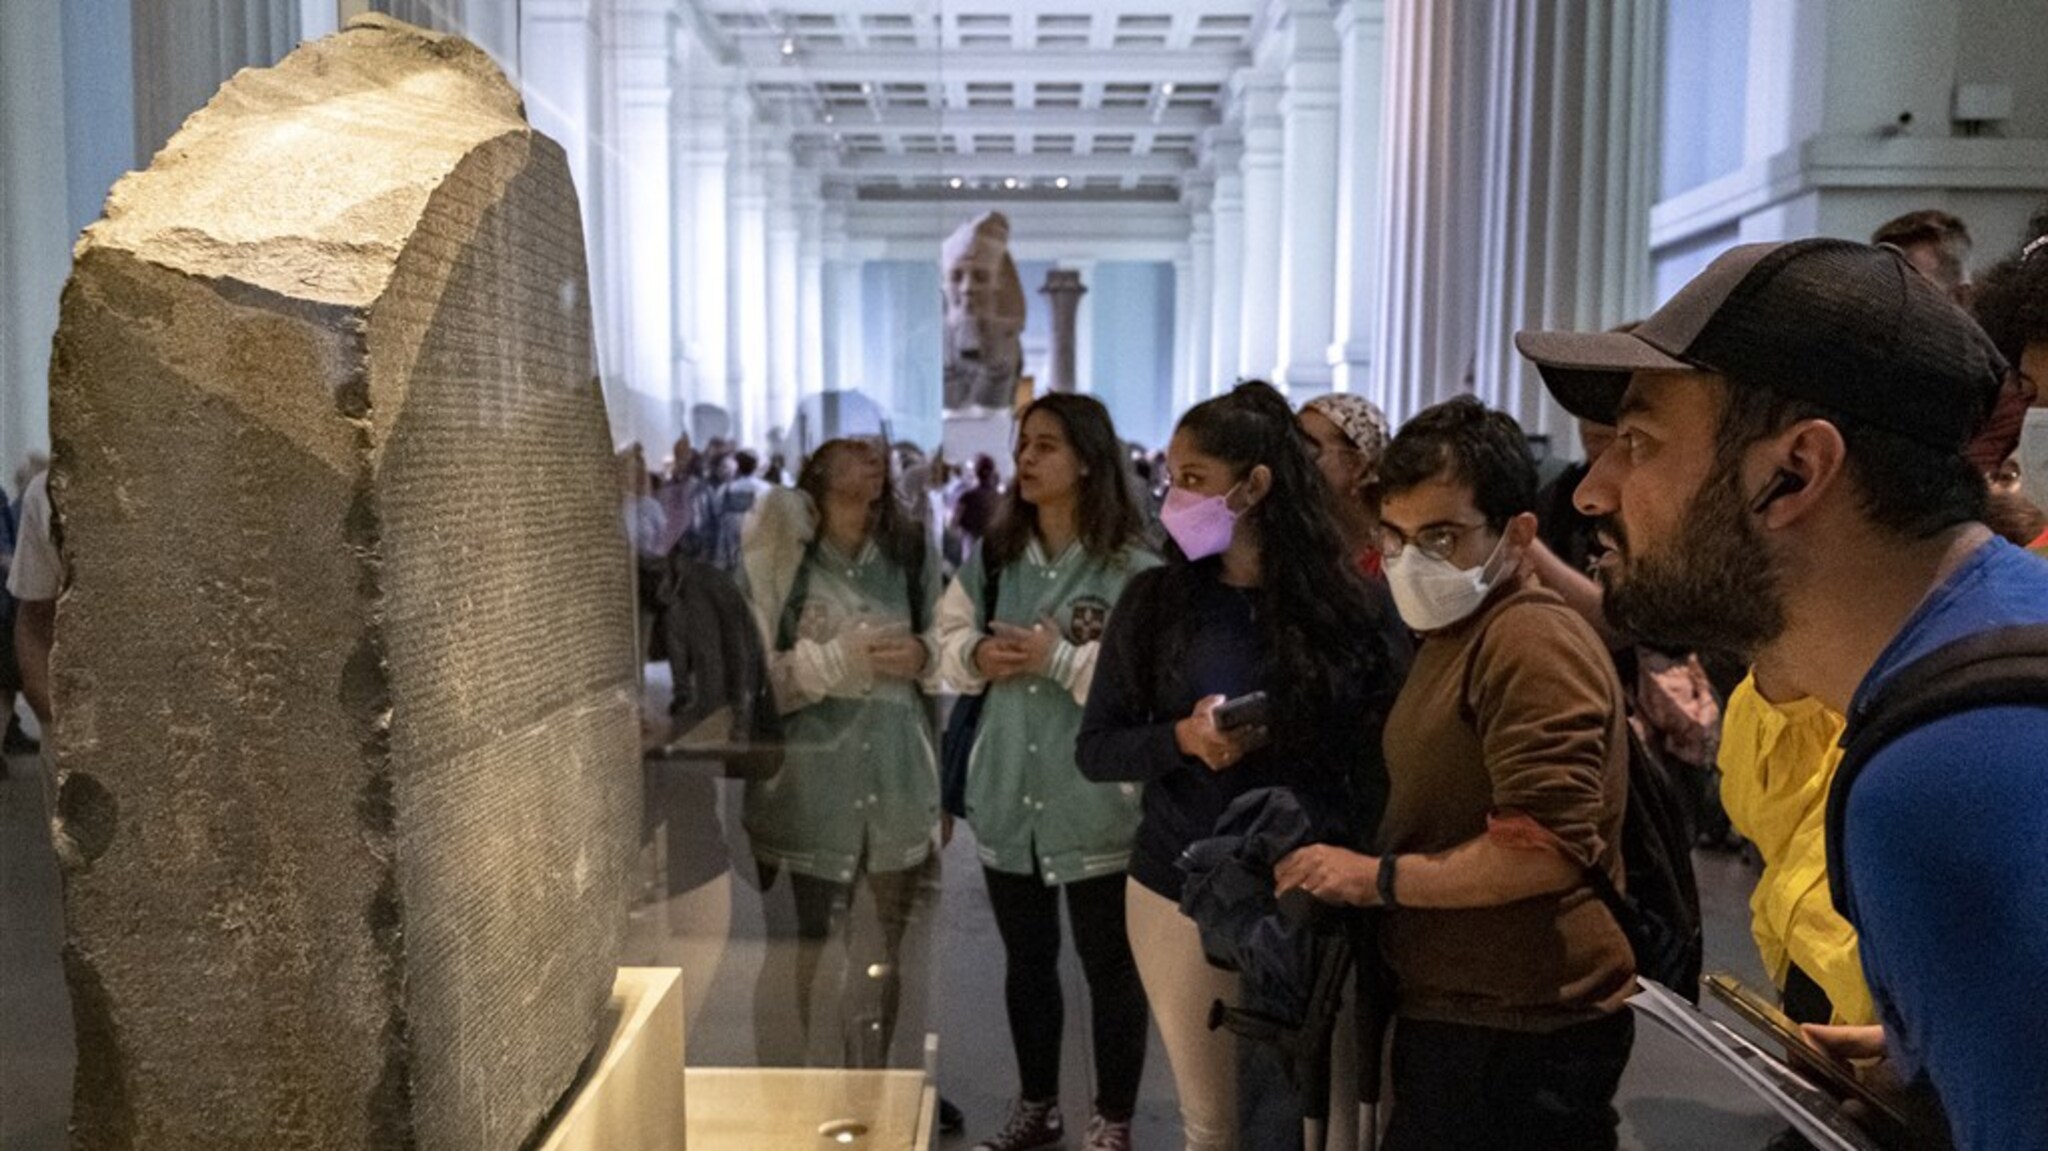 Egyptian Indiana Jones wants to return the Rosetta Stone: Museums must get rid of looted art